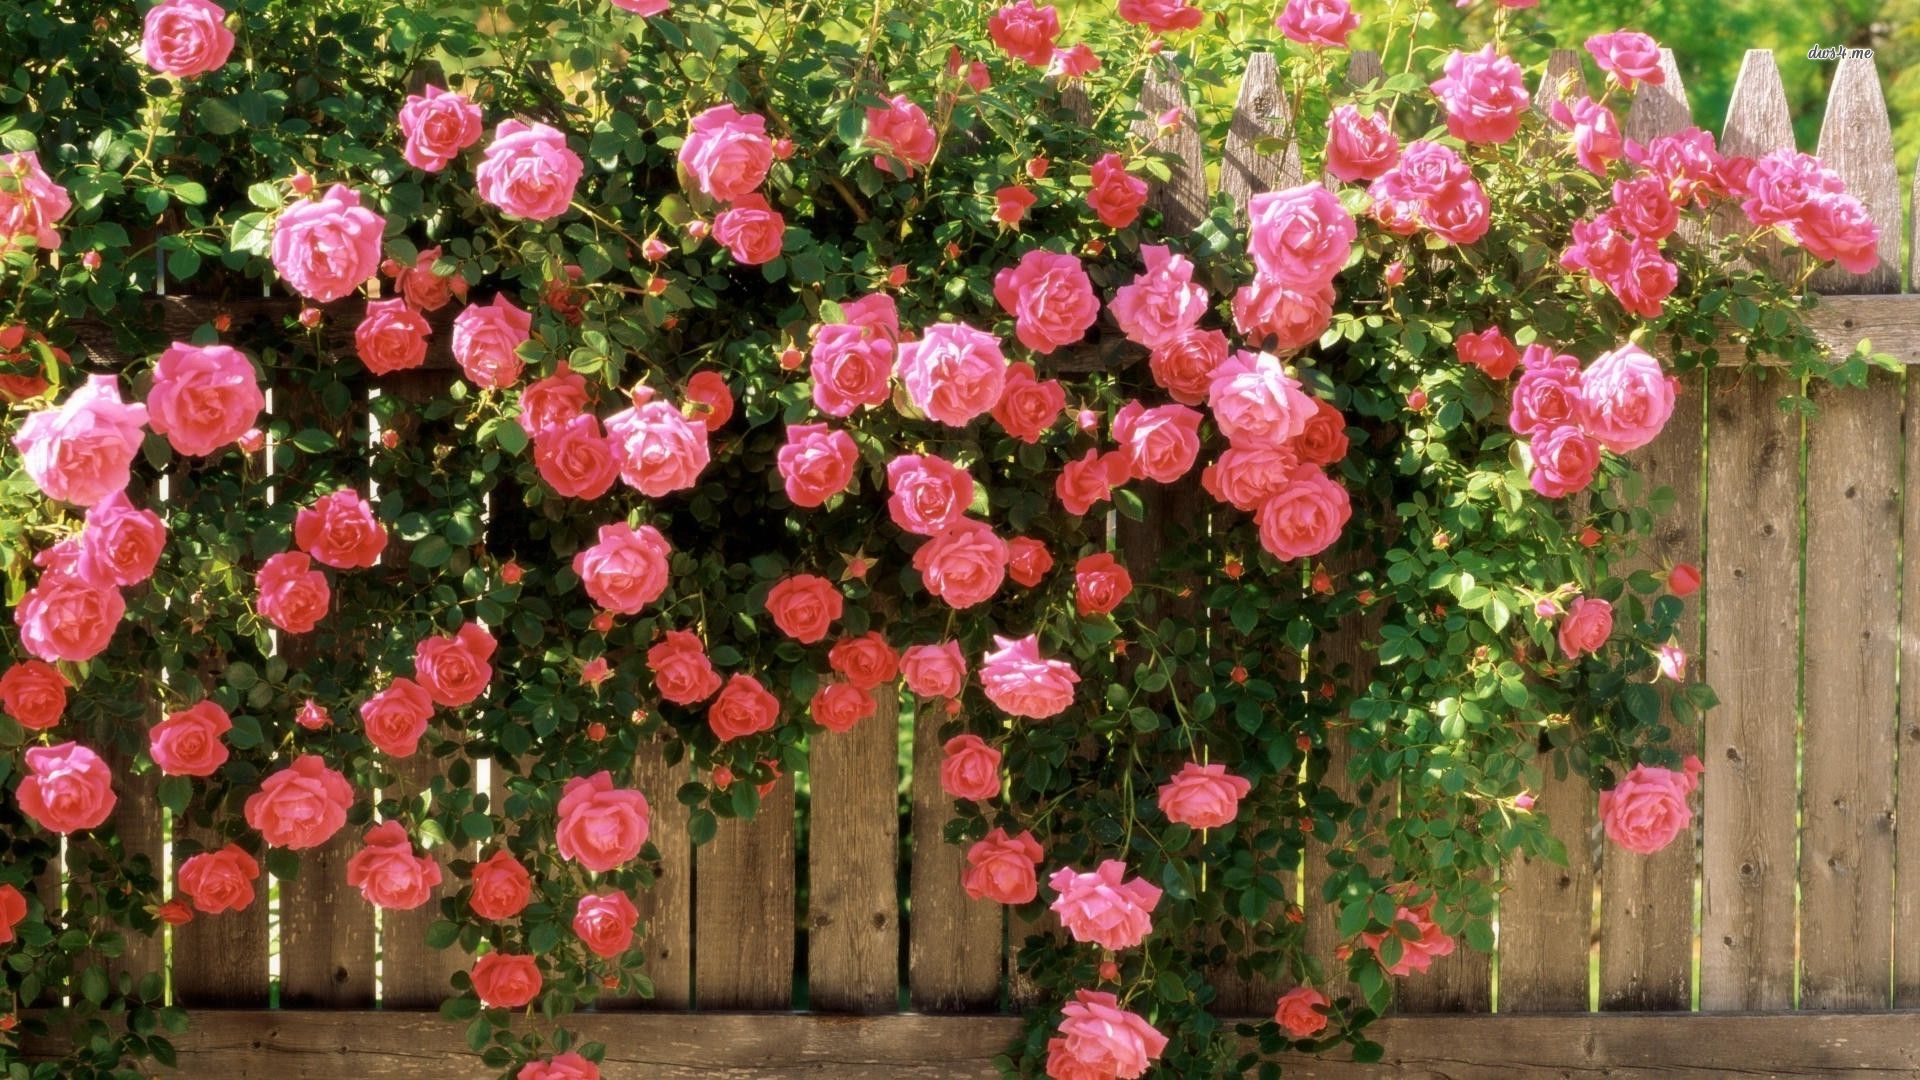 ... Pink roses growing over the fence wallpaper 1920x1080 ...